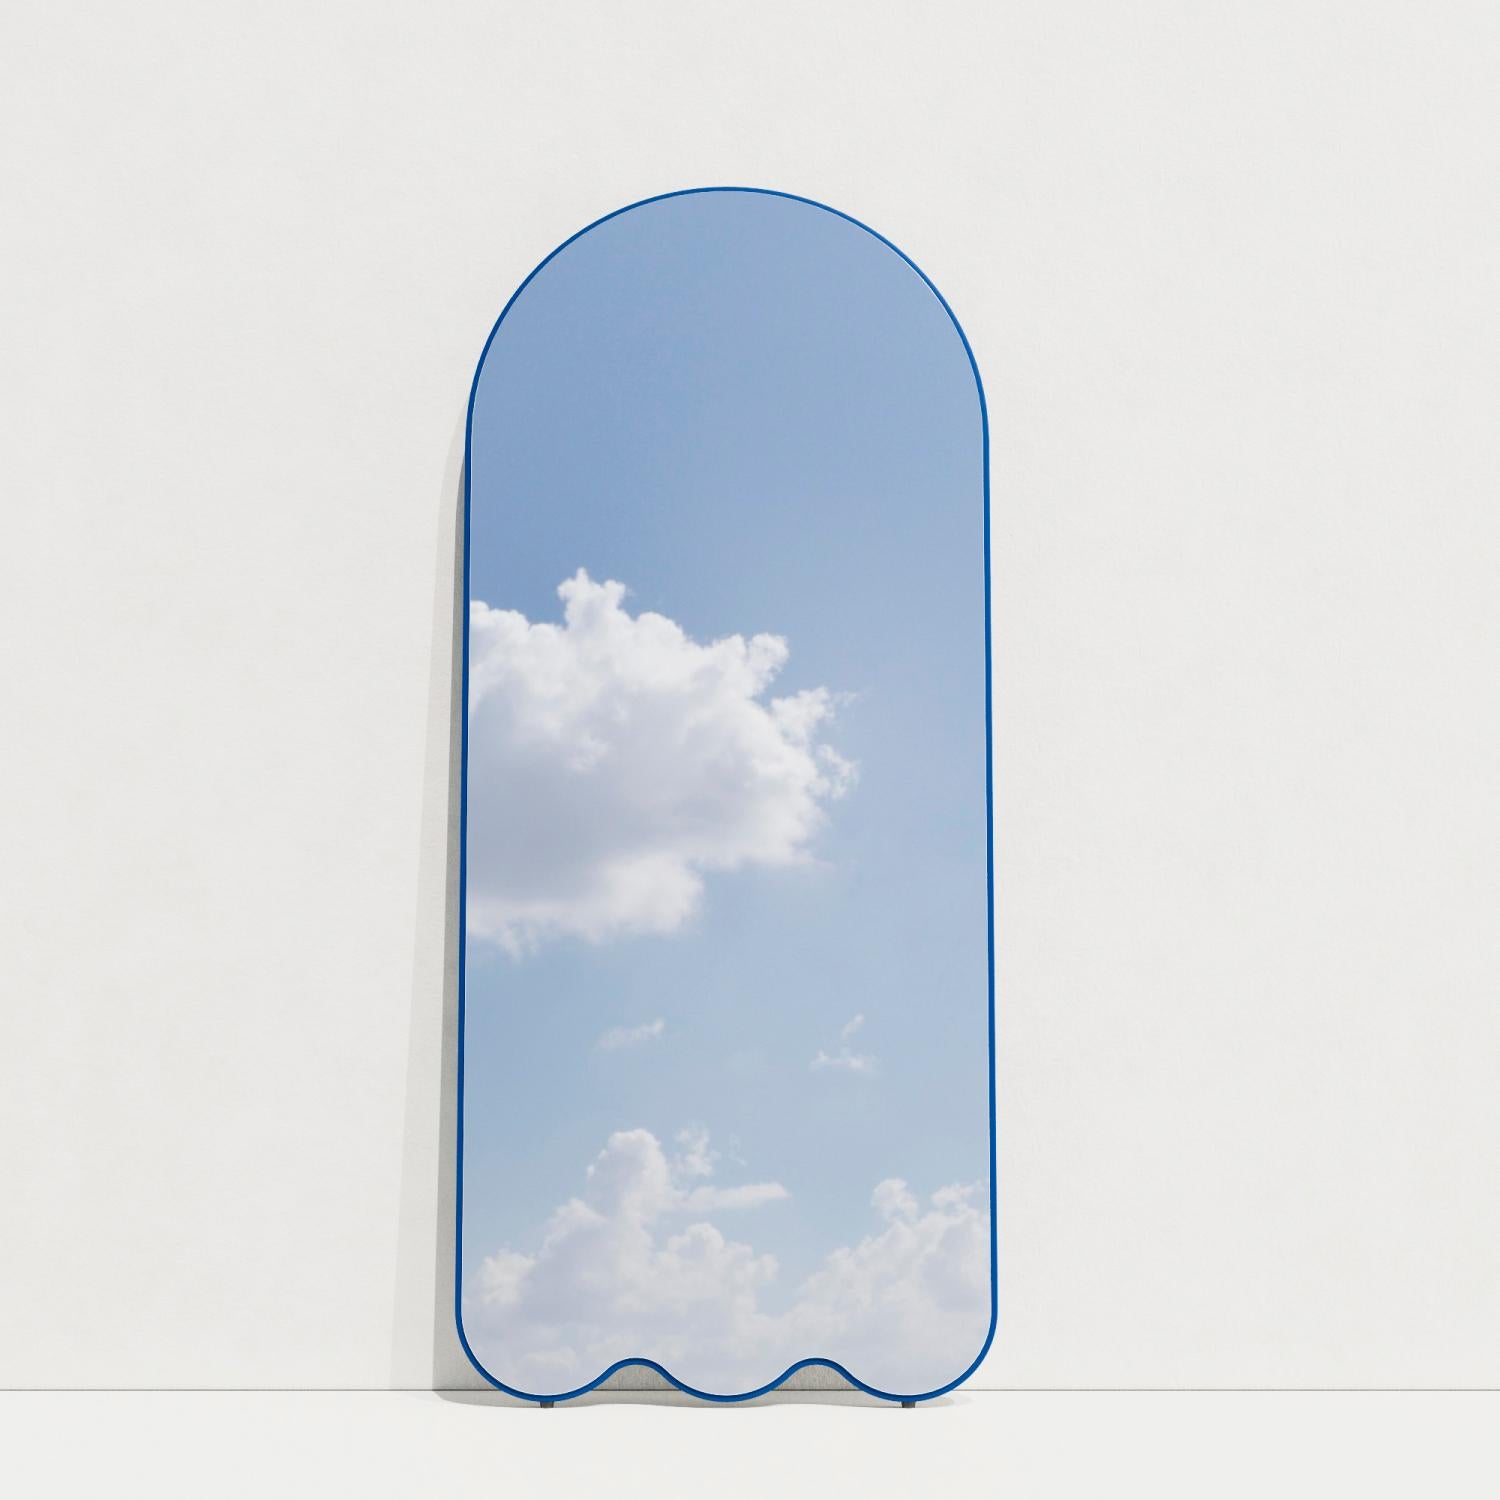 Contemporary Mirror 'Archvyli A3' by Oitoproducts.

Dimensions:
W 78 cm x H 180 cm x D 4 cm
W 37 in x H 71 in x D 1.3 in

Materials: Painted ecological water paint MDF, silver glass mirror, special rubber feet.

About
A full-length art mirror that